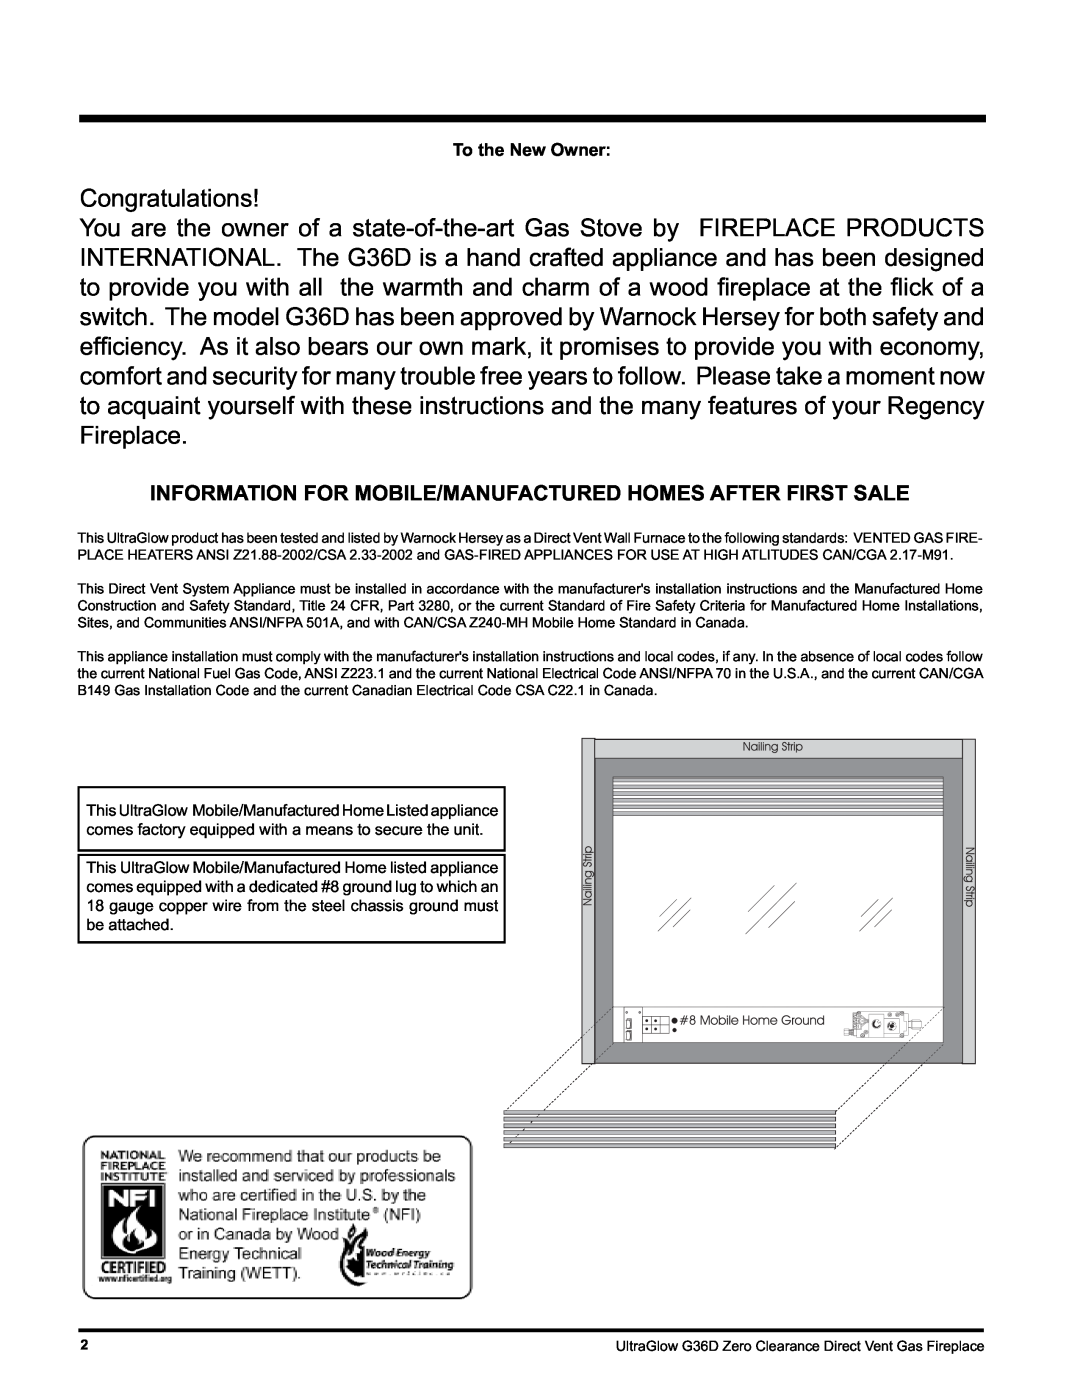 Regency G36D-LP PROPANE, G36D-NG NATURAL GAS installation manual Congratulations, To the New Owner 